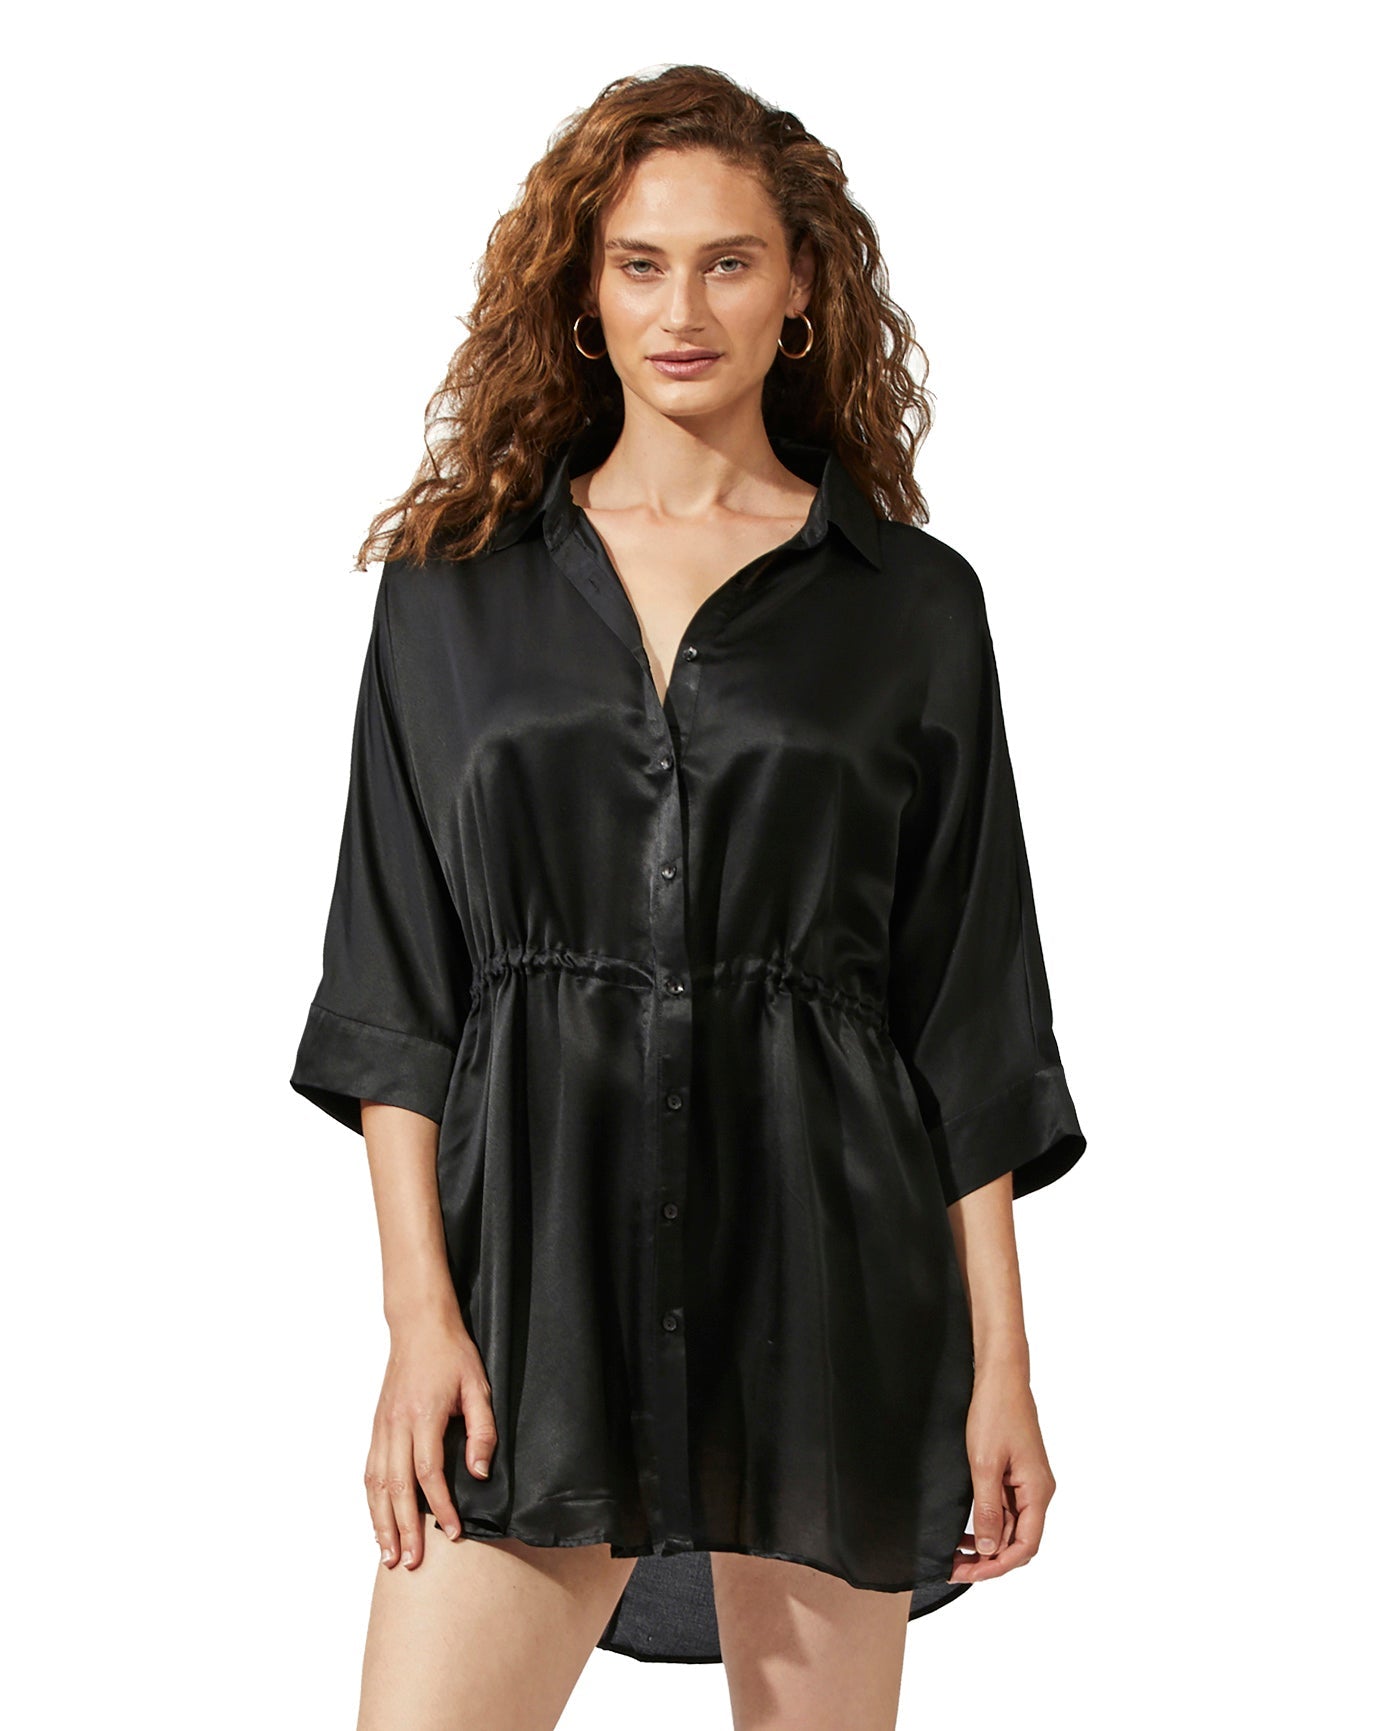 Front View Of Luma Buttoned Cover Up Blouse | LUMA IVY BLACK